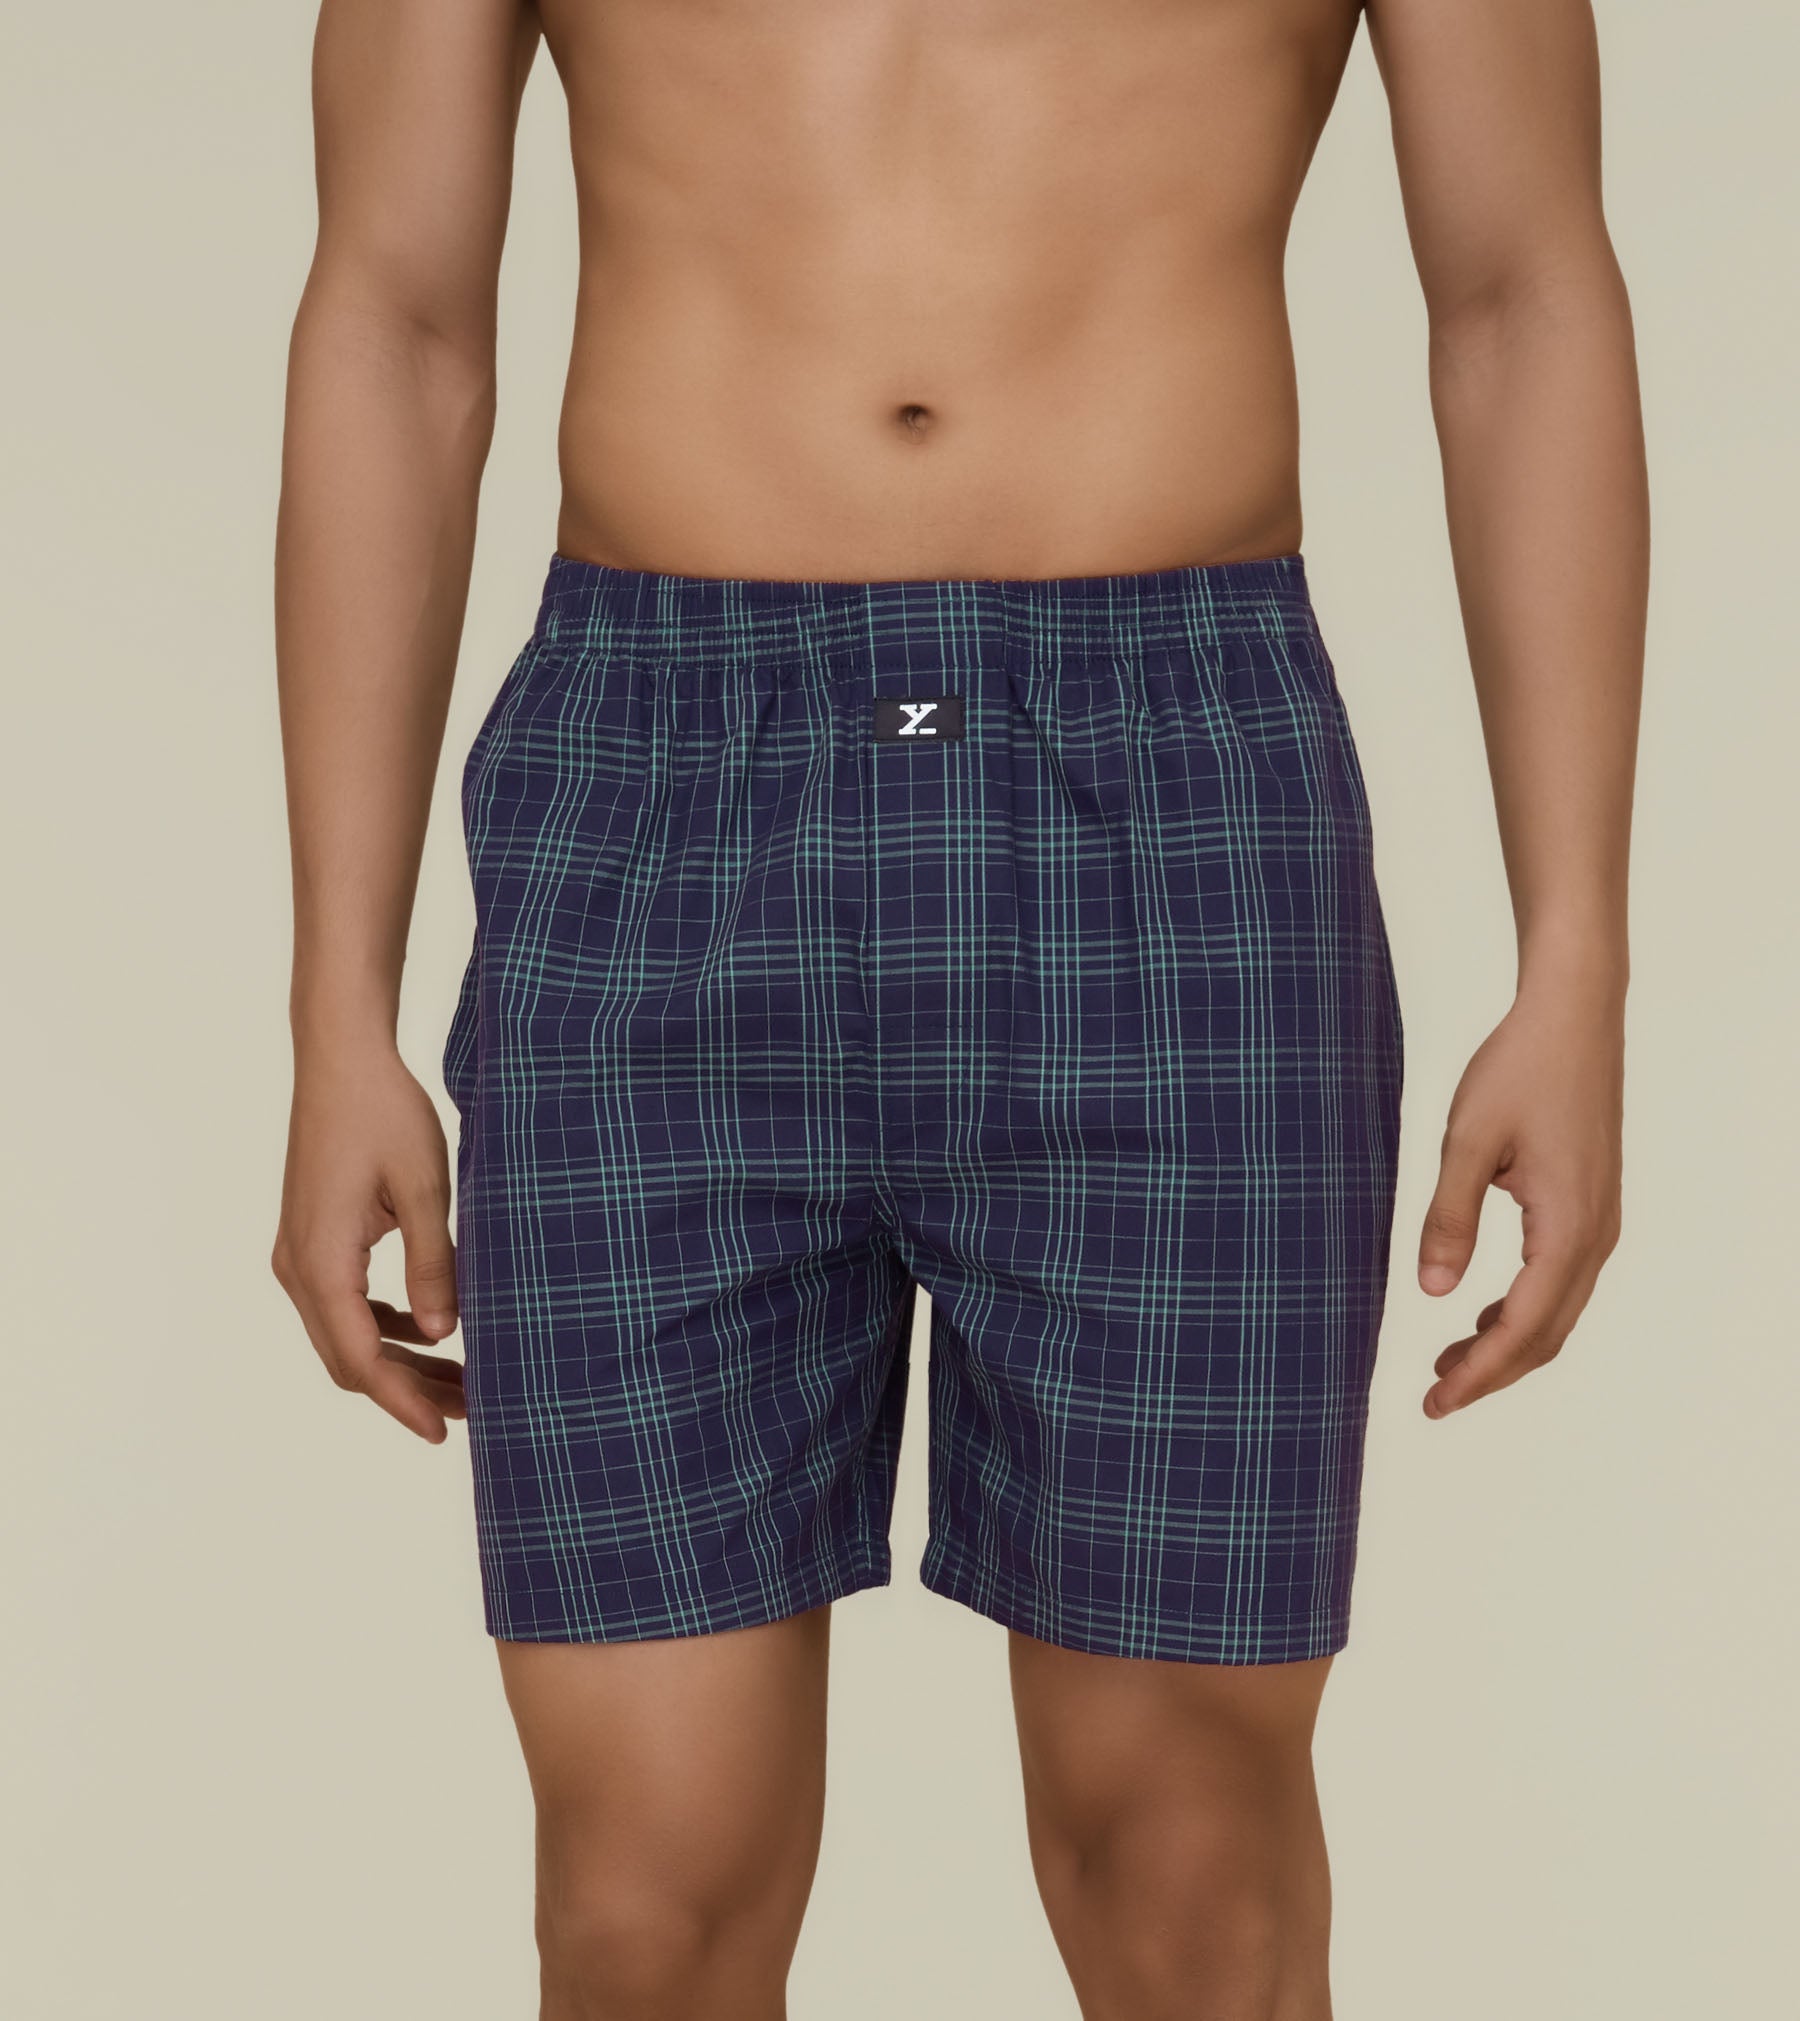 Checkmate Combed Cotton Boxer Shorts For Men Storm Blue - XYXX Mens Apparels